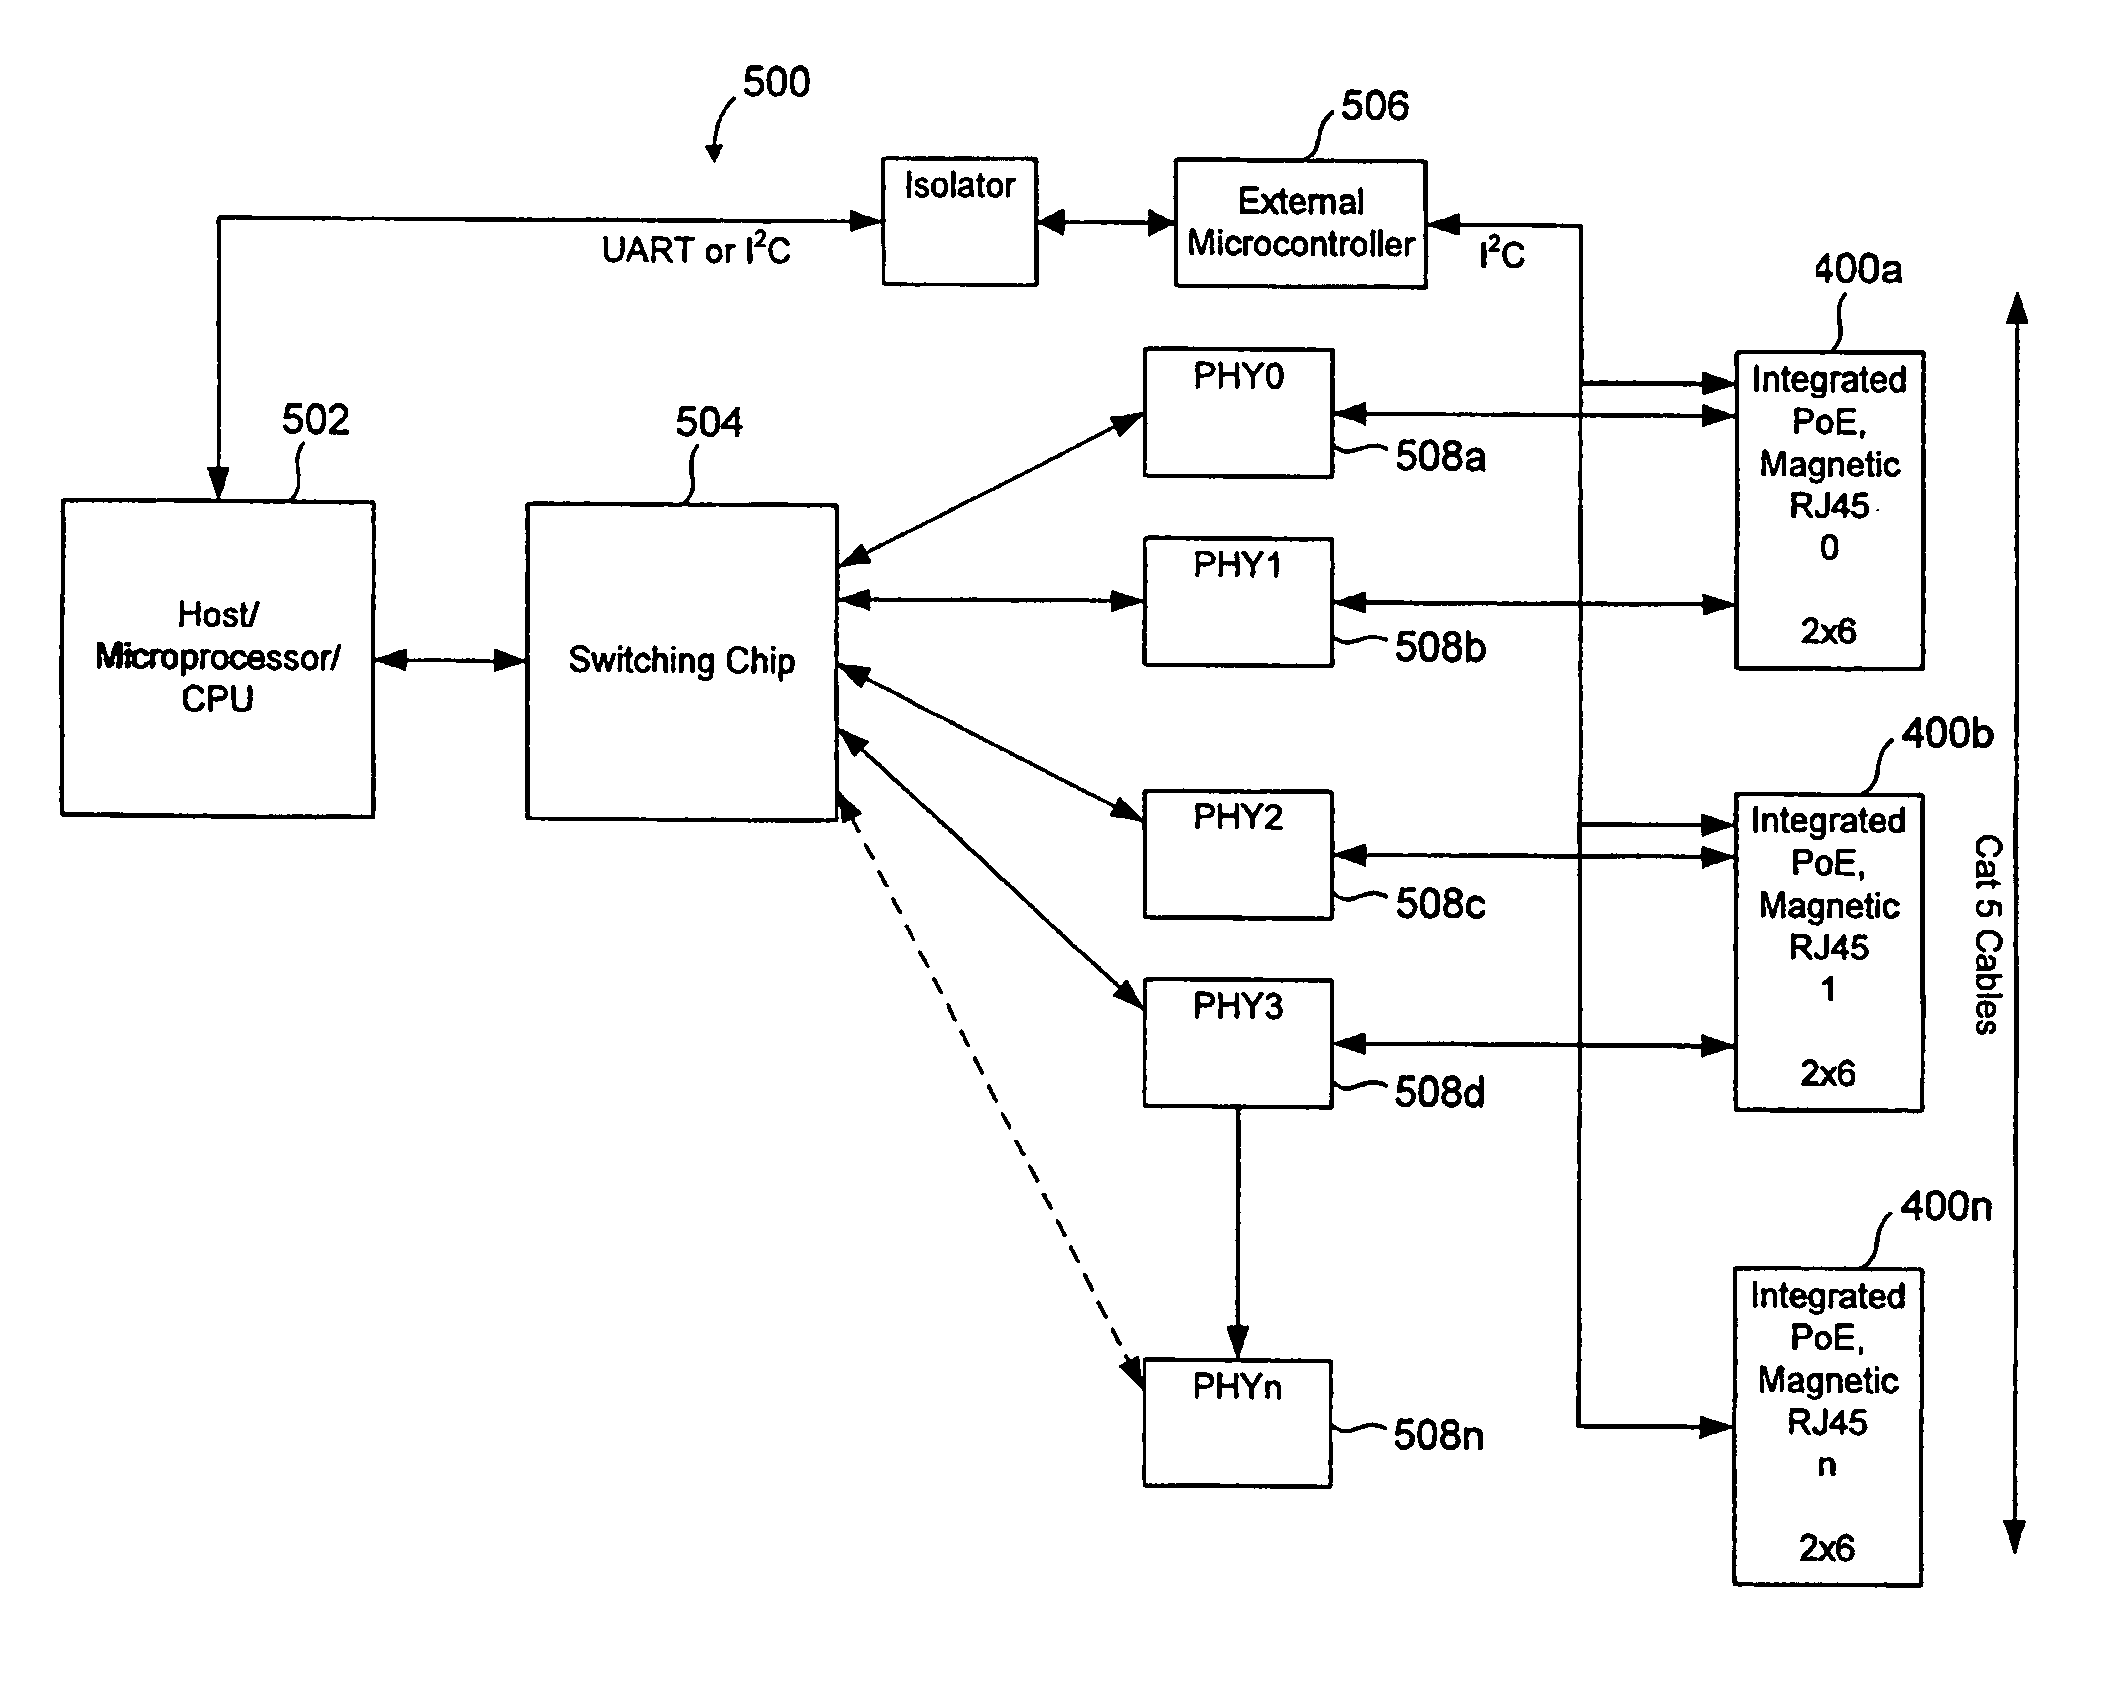 Power over ethernet connector with integrated power source equipment (PSE) controller supporting high power applications